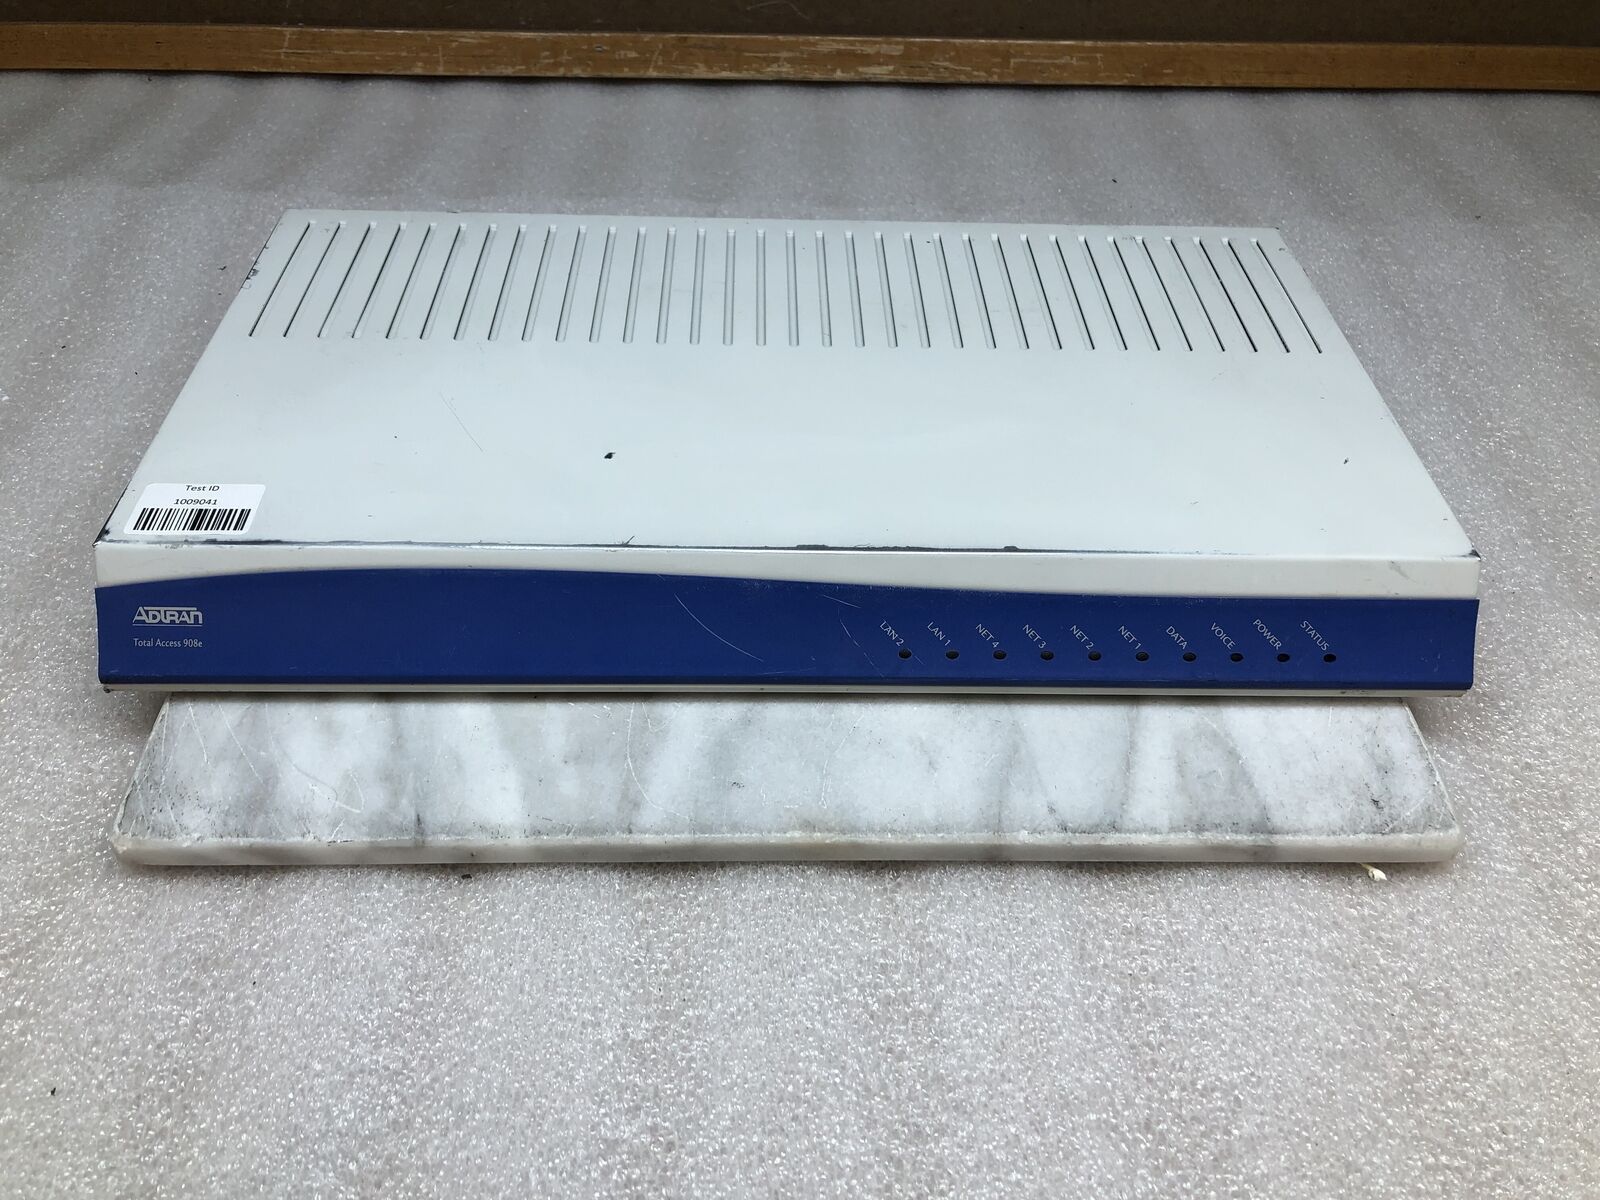 Adtran Total Access 908e 2nd Gen 4242908L Gateway Router - TESTED AND RESET